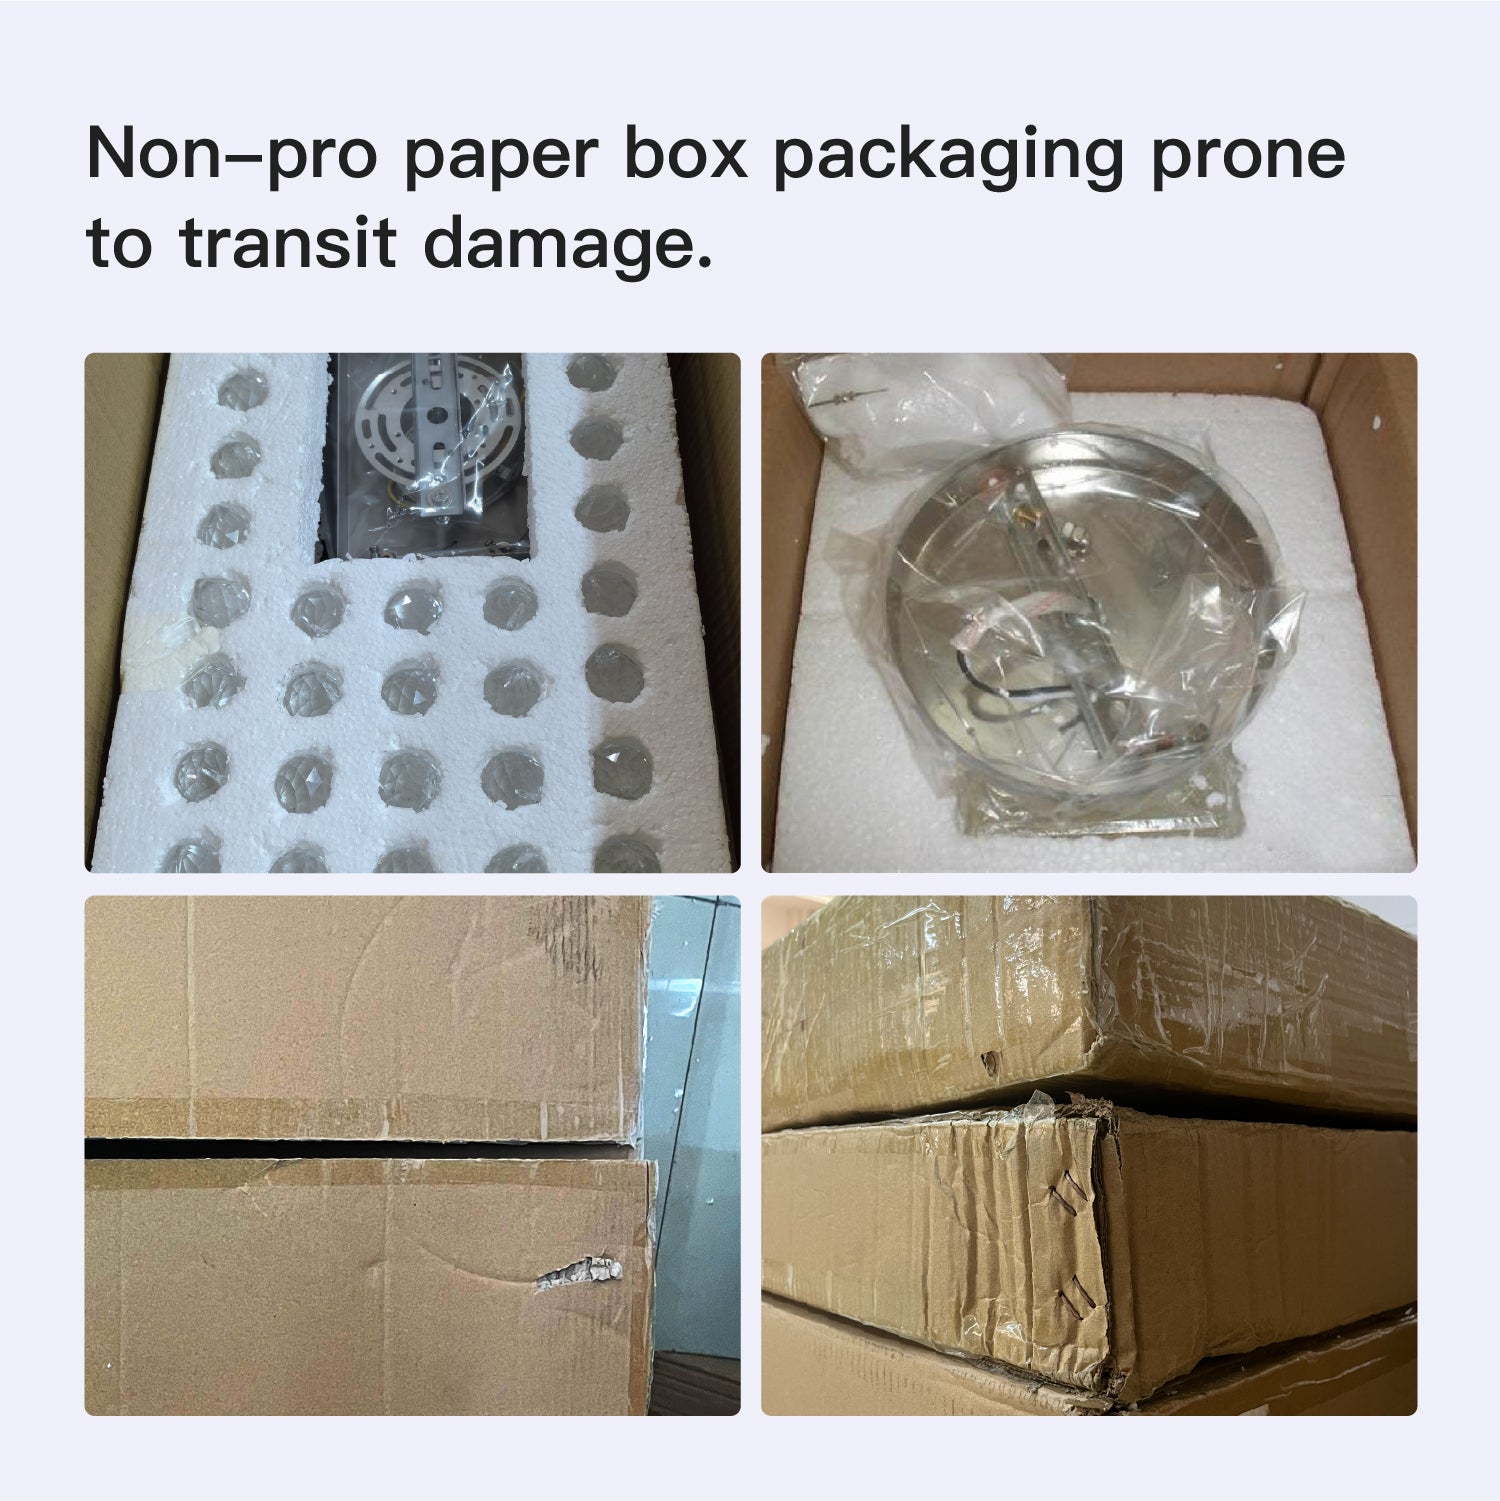 Non-pro paper box packaging prone to transit damage